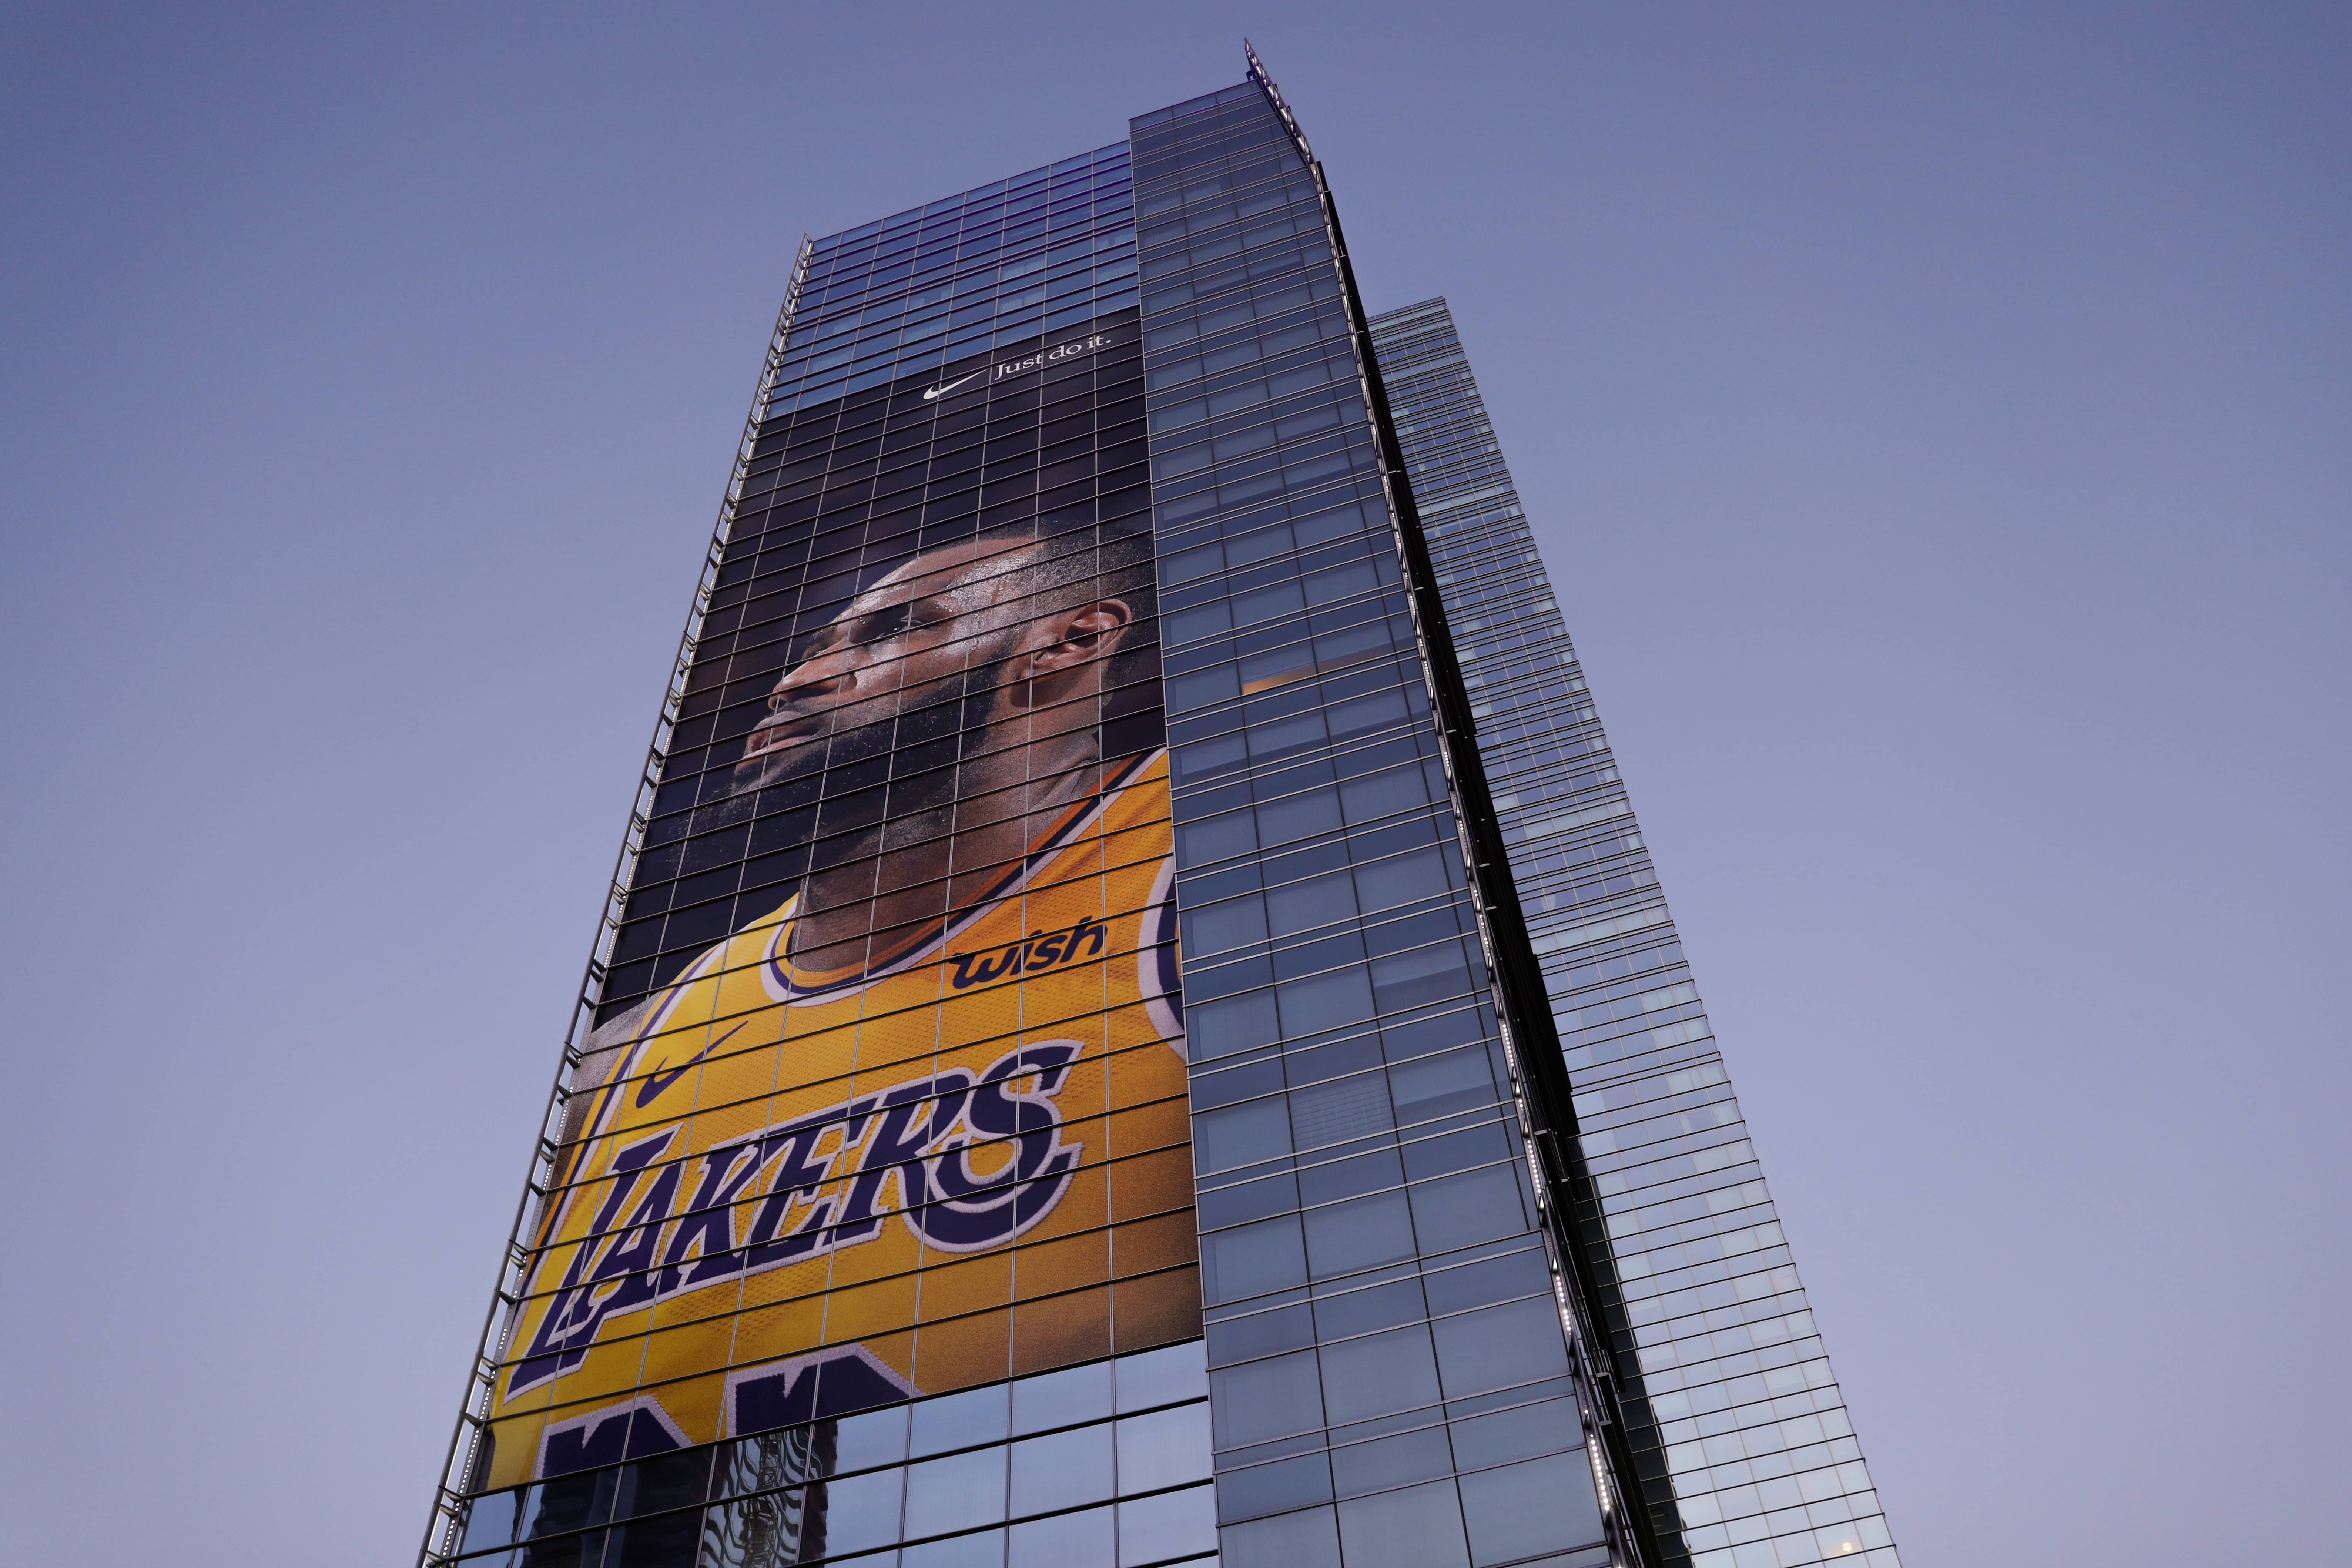 advertising-displays-of-nba-basketball-star-lebron-james-in-downtown-los-angeles